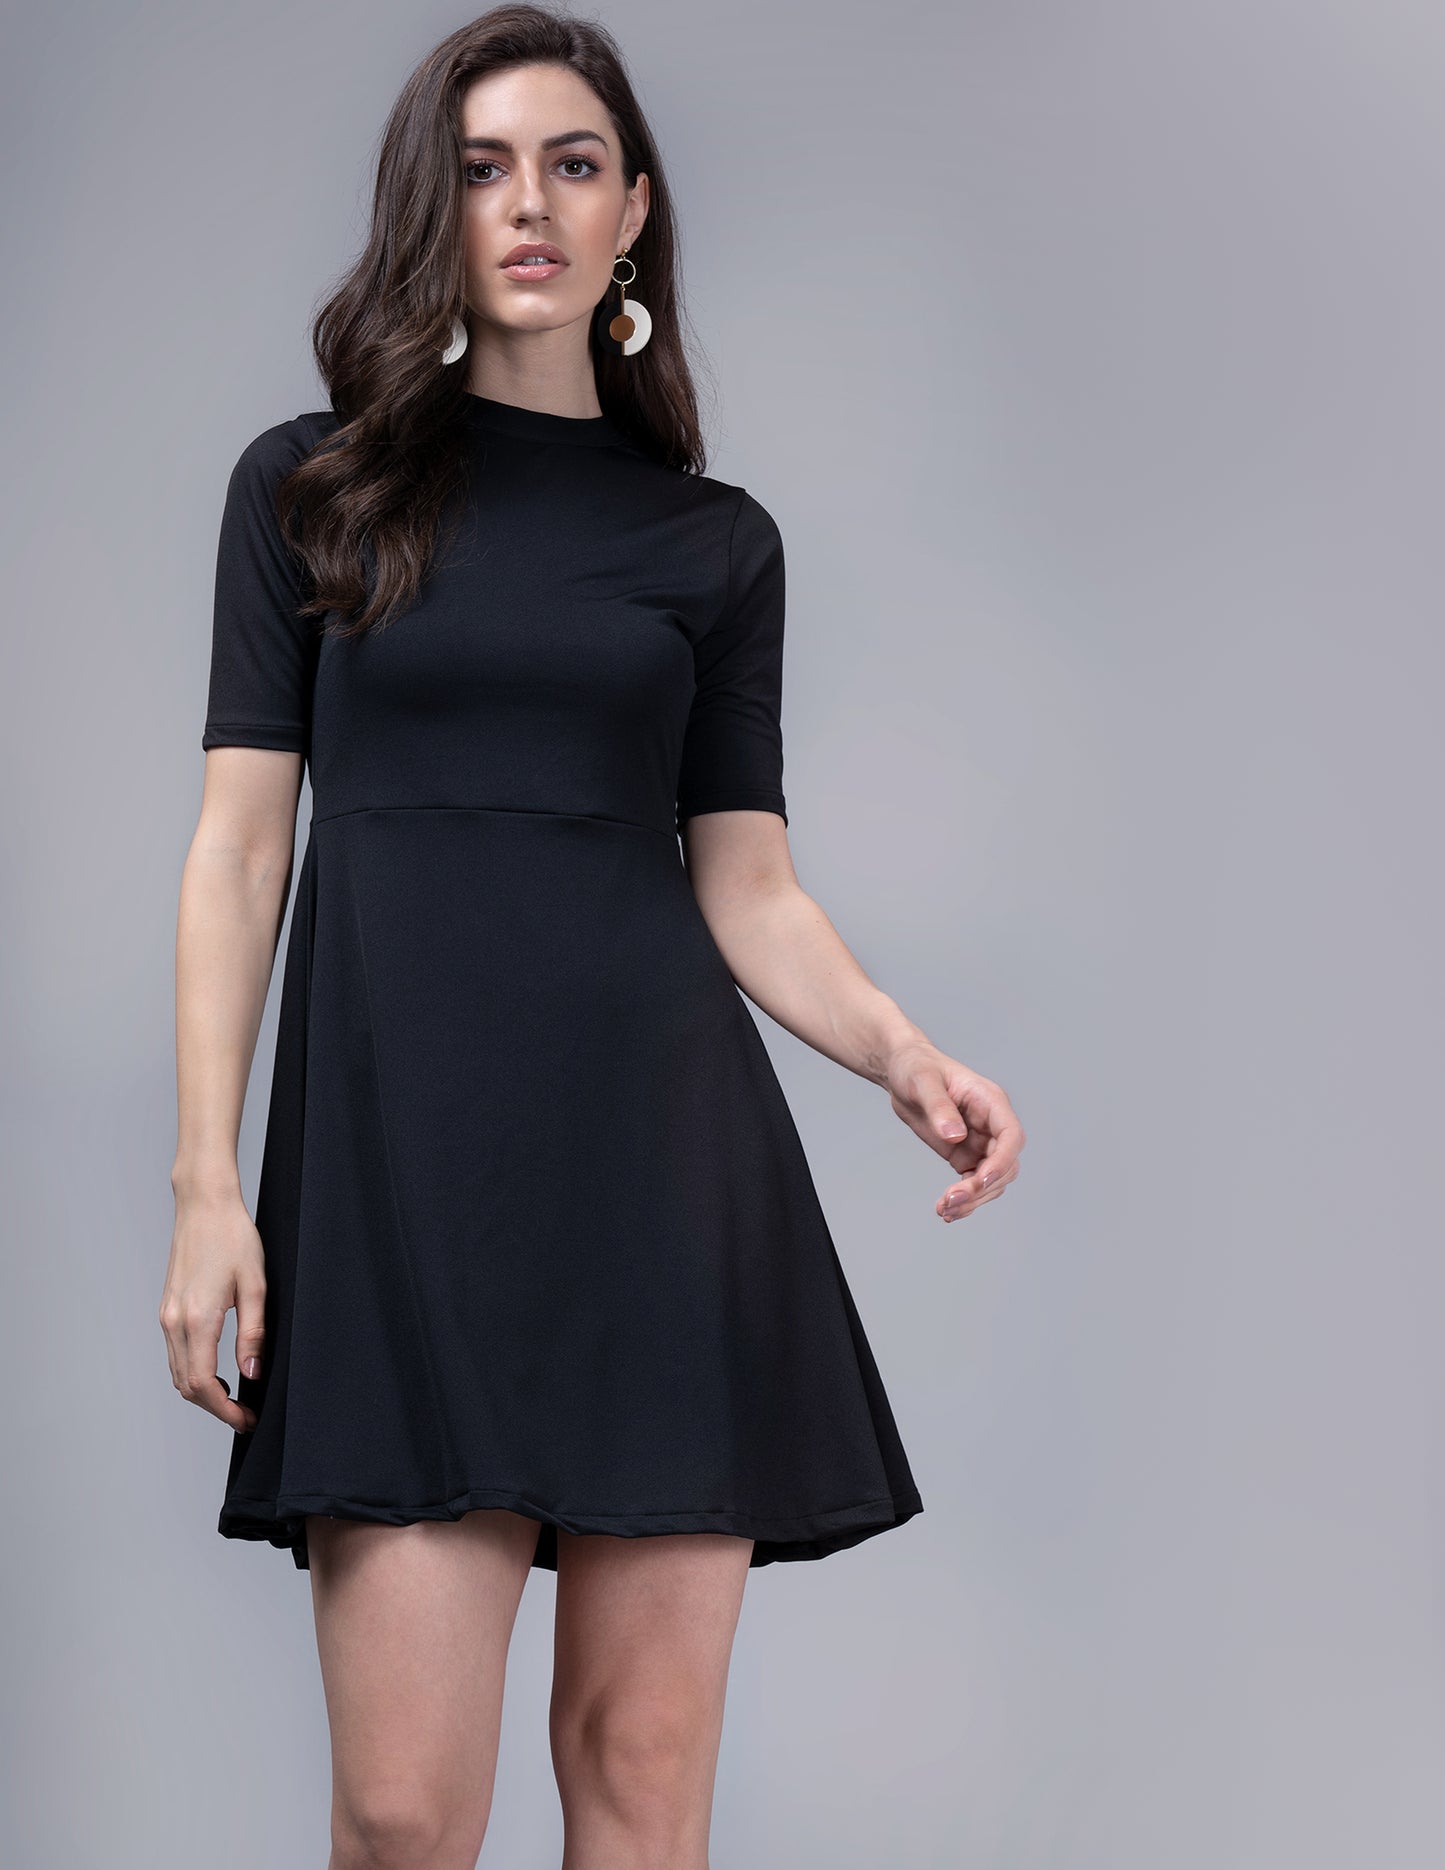 11 Ways to Accessorize a Black Dress to Elevate Your LBD